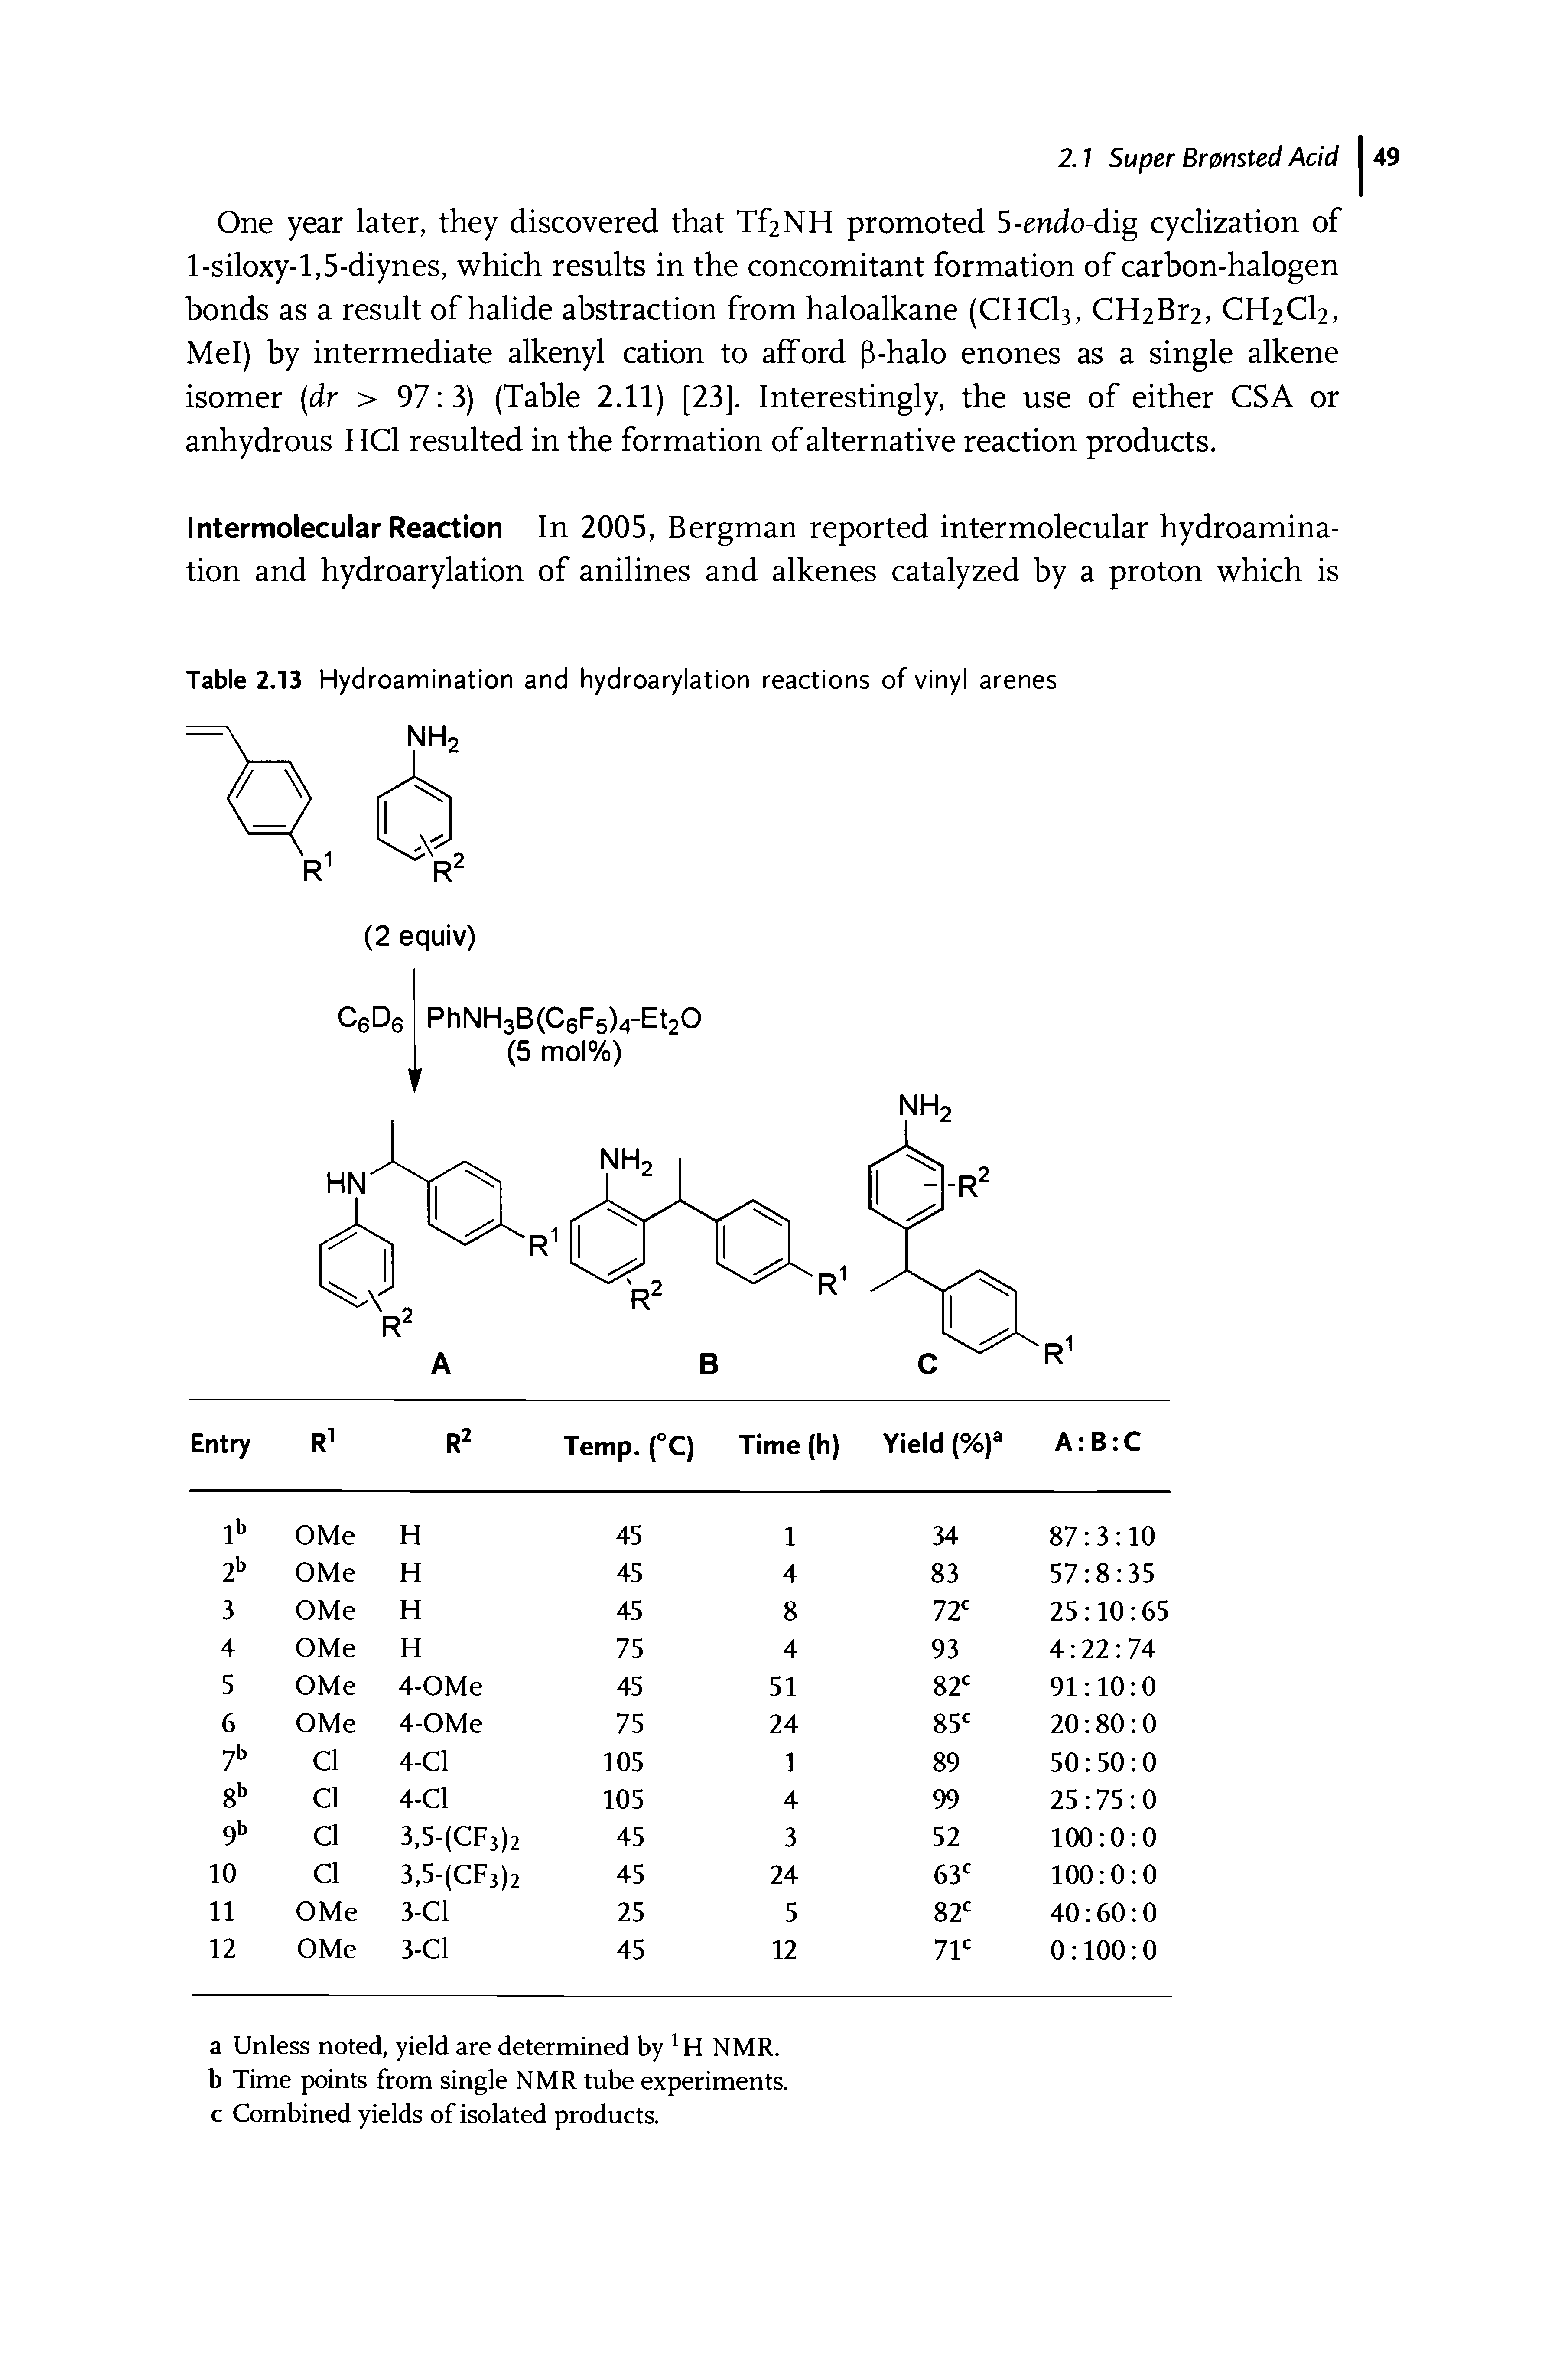 Table 2.13 Hydroamination and hydroarylation reactions of vinyl arenes...